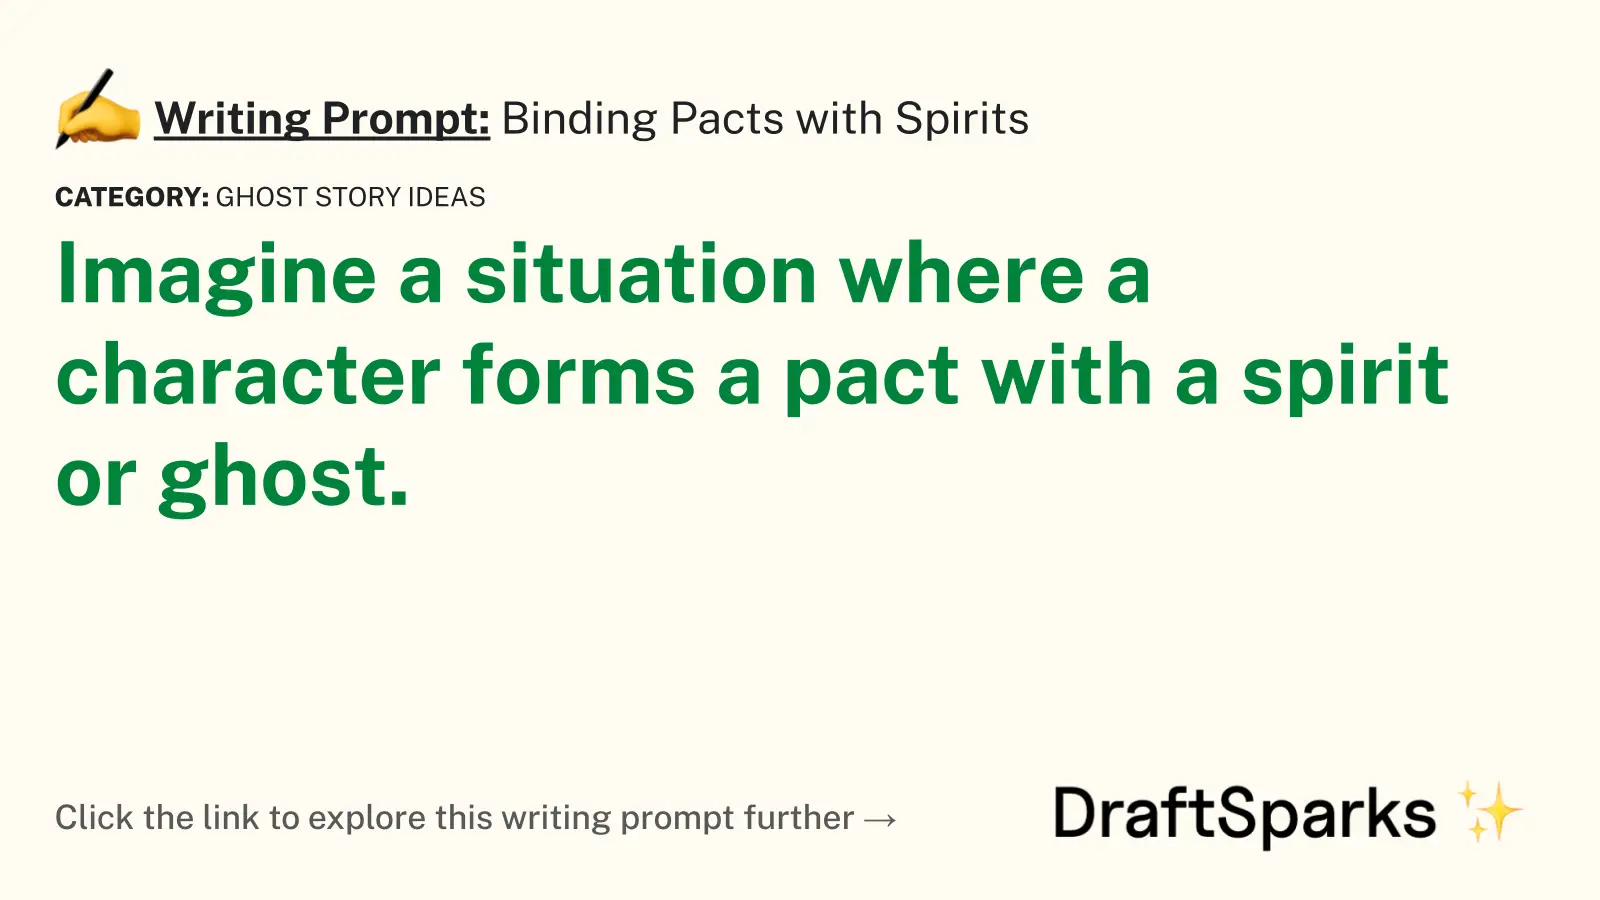 Binding Pacts with Spirits